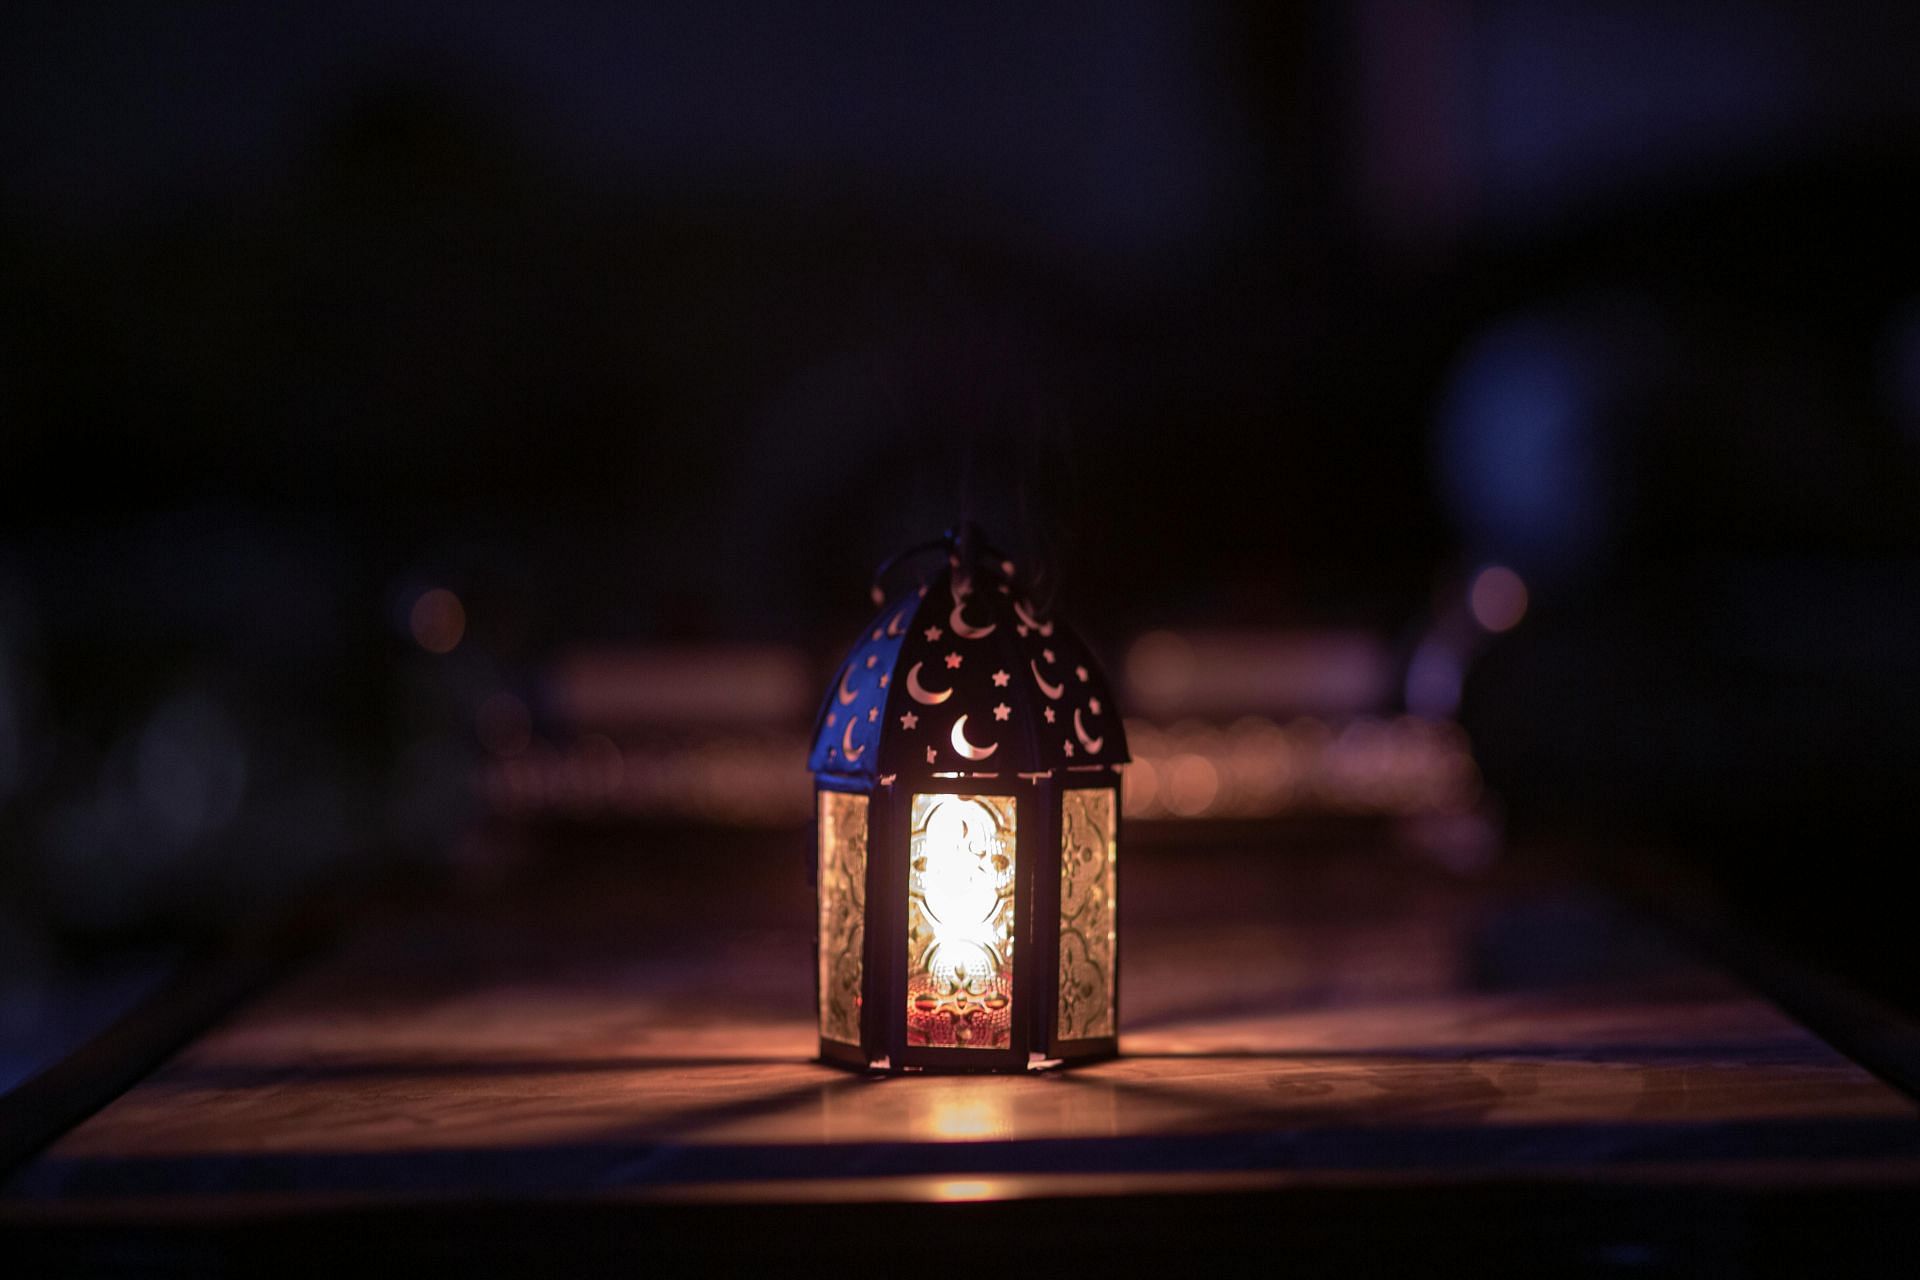 Benefits of fasting in Ramadan (image sourced via Pexels / Photo by ahmed)